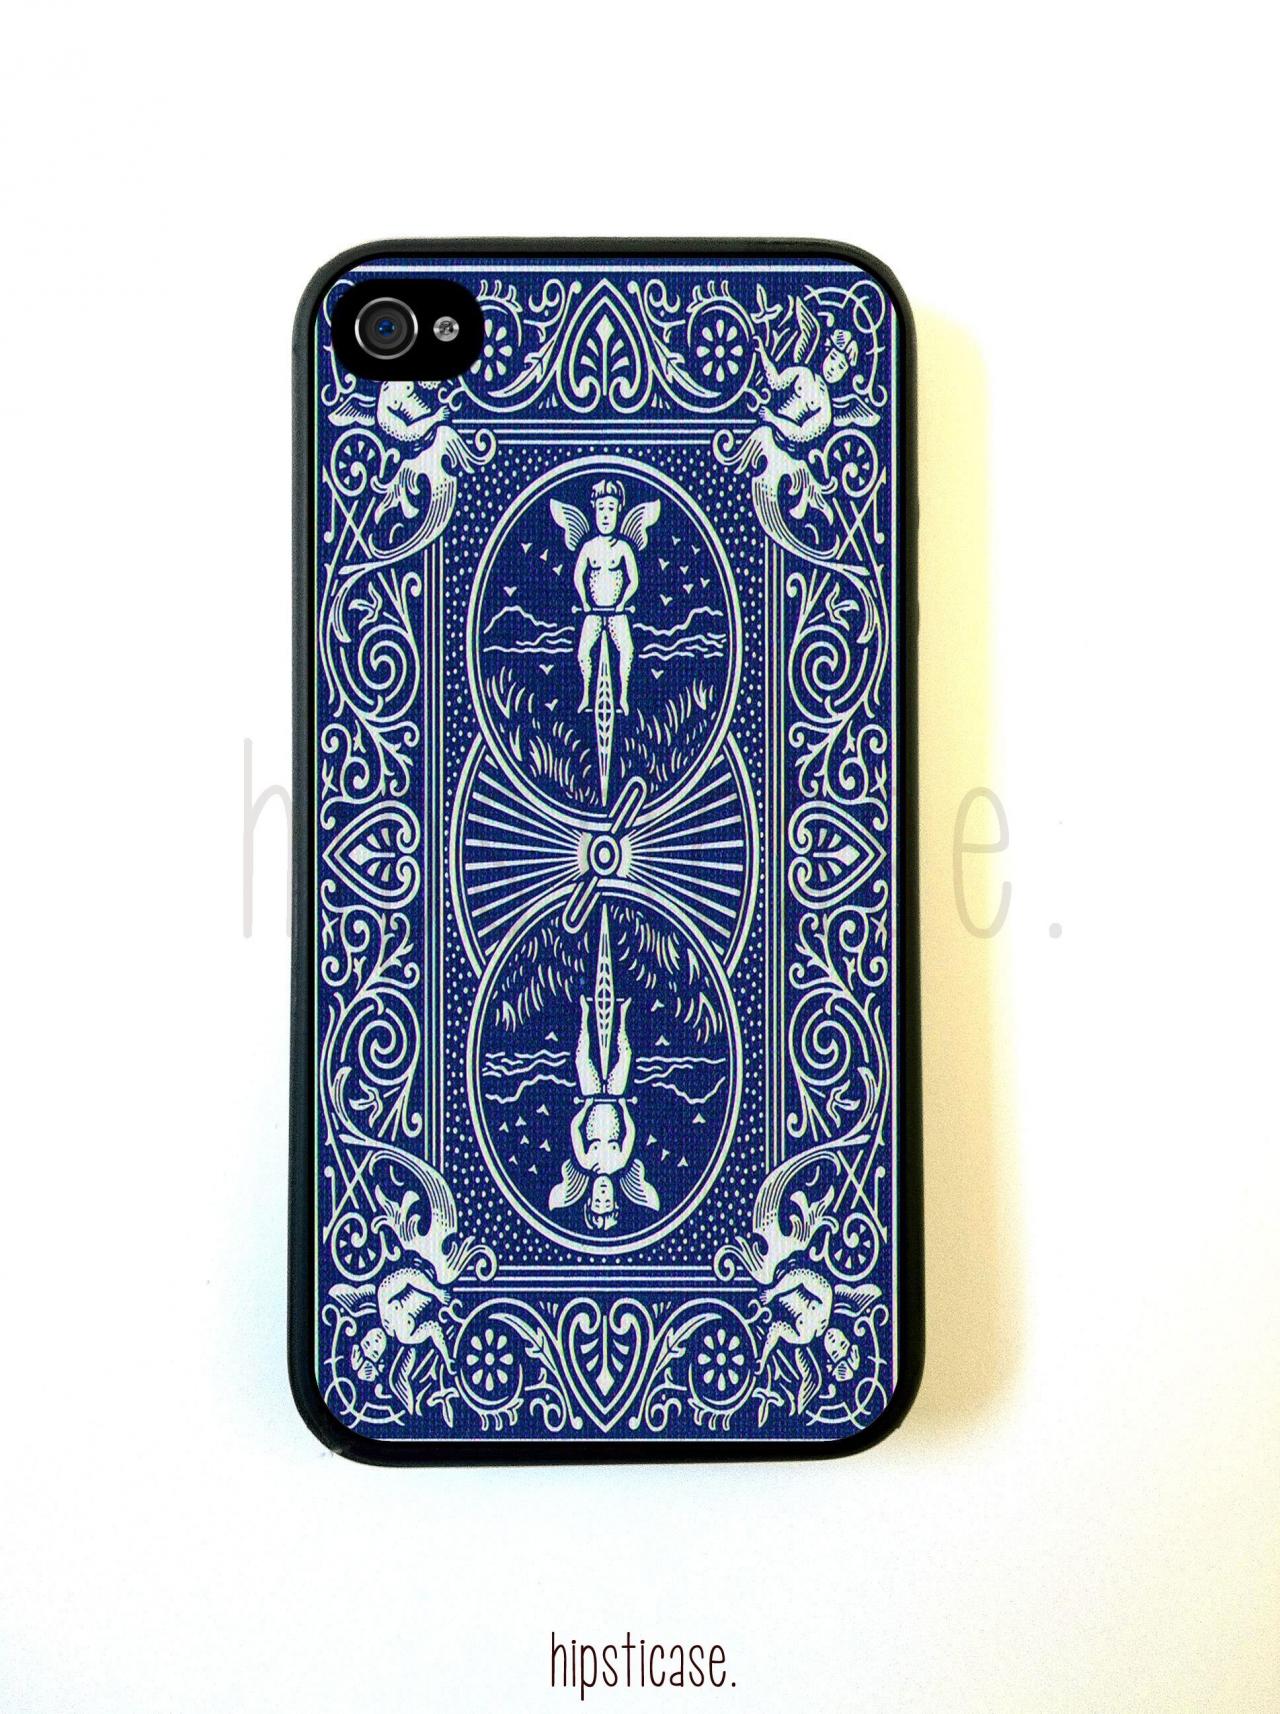 Bicycle Playing Card Back Iphone 5 Case - For Iphone 5/5g - Designer Tpu Case Verizon At&t Sprint